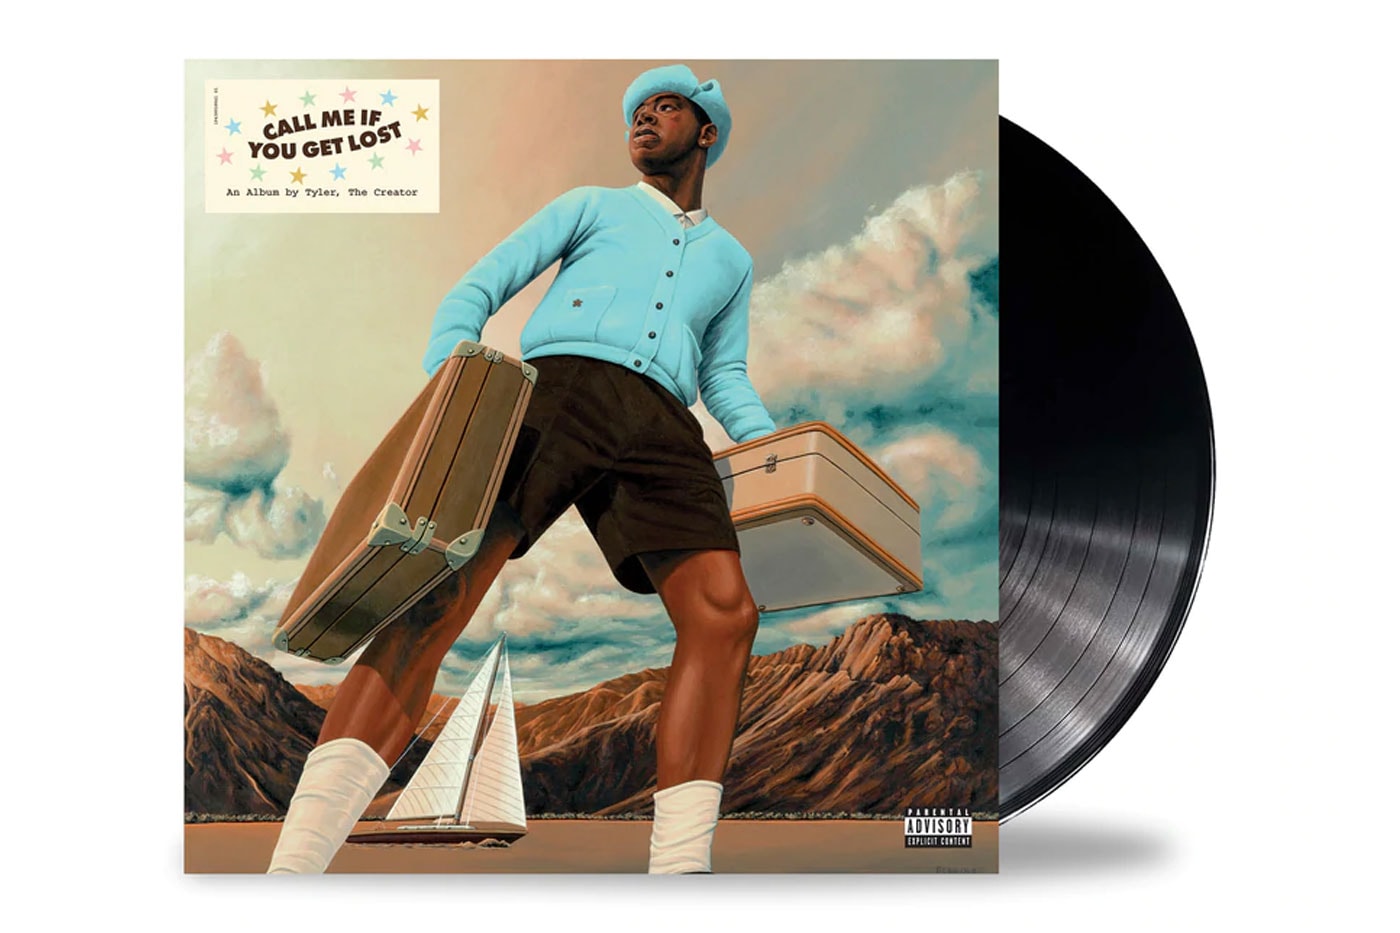 Golf Wang Tyler, the Creator's Call Me If You Get Lost Vinyl cassette cd posters sir baudelaire lumberjack wusyaname gregory ferrand release info price date